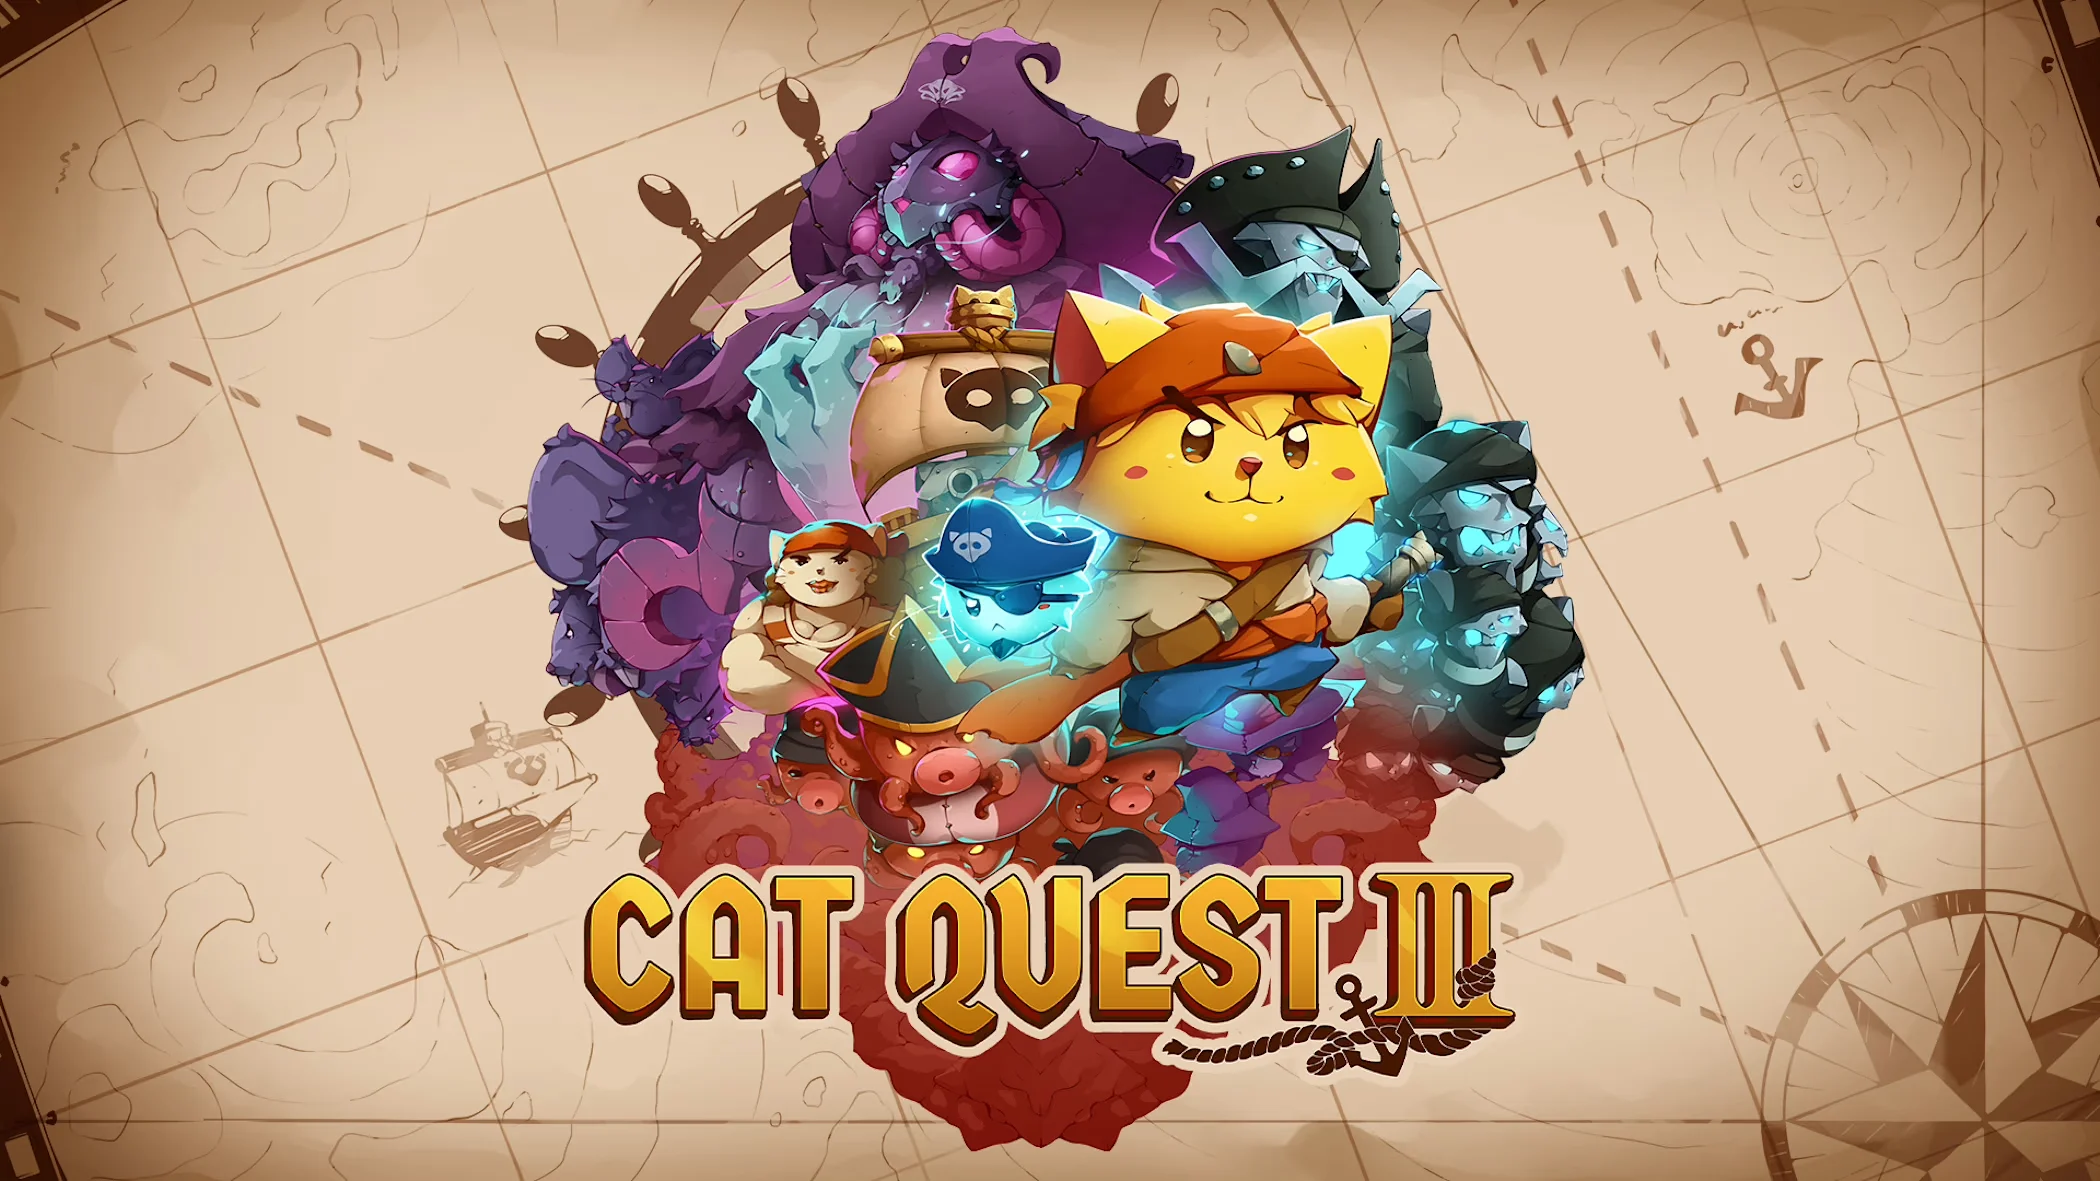 Cats, rats, and octopi as pirates in Cat Quest III